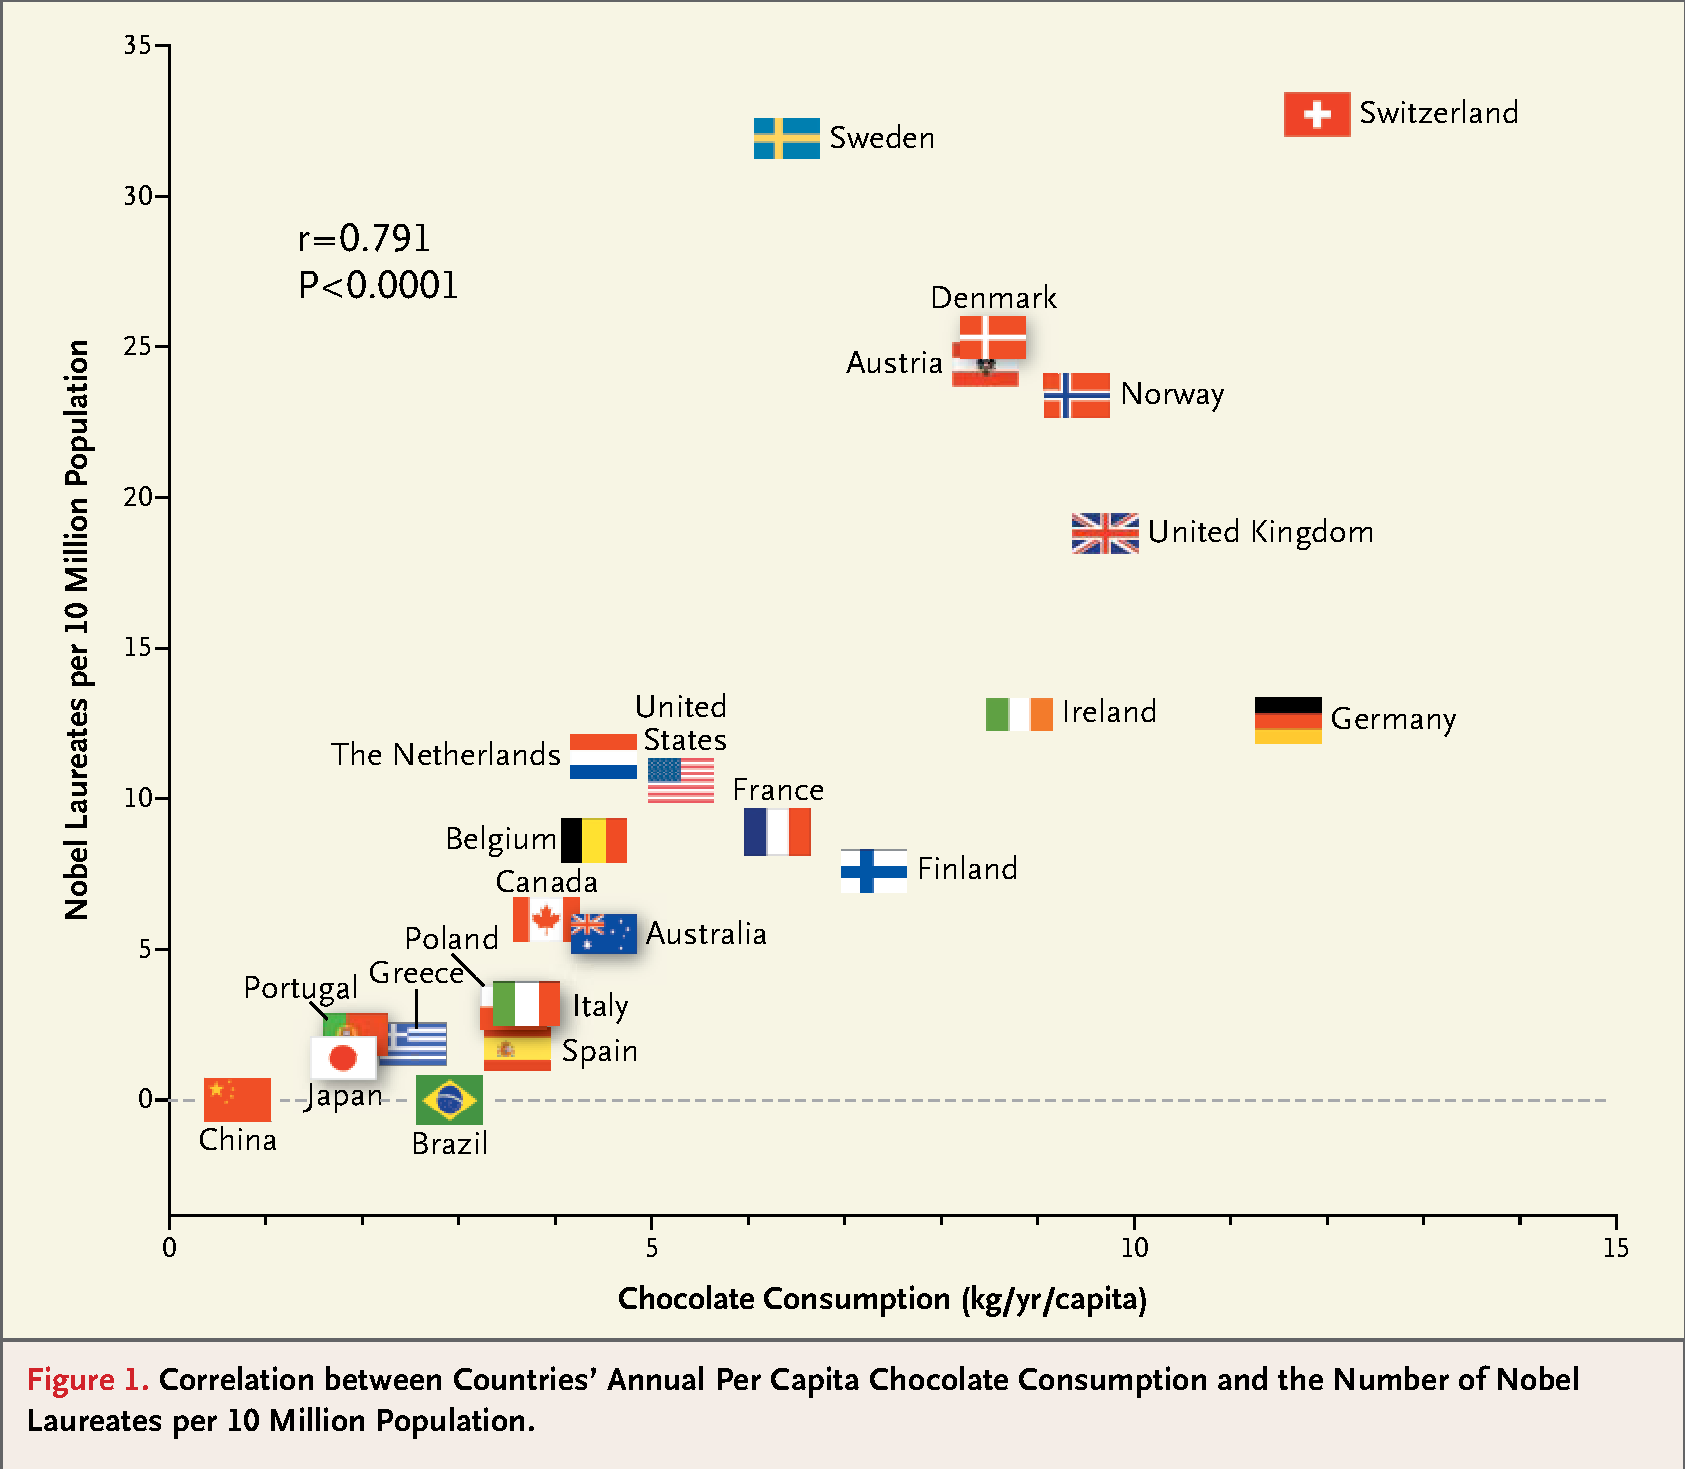 There is strong correlation between a country's chocolate consumption and the amount of Nobel Prize Laureates from that country.